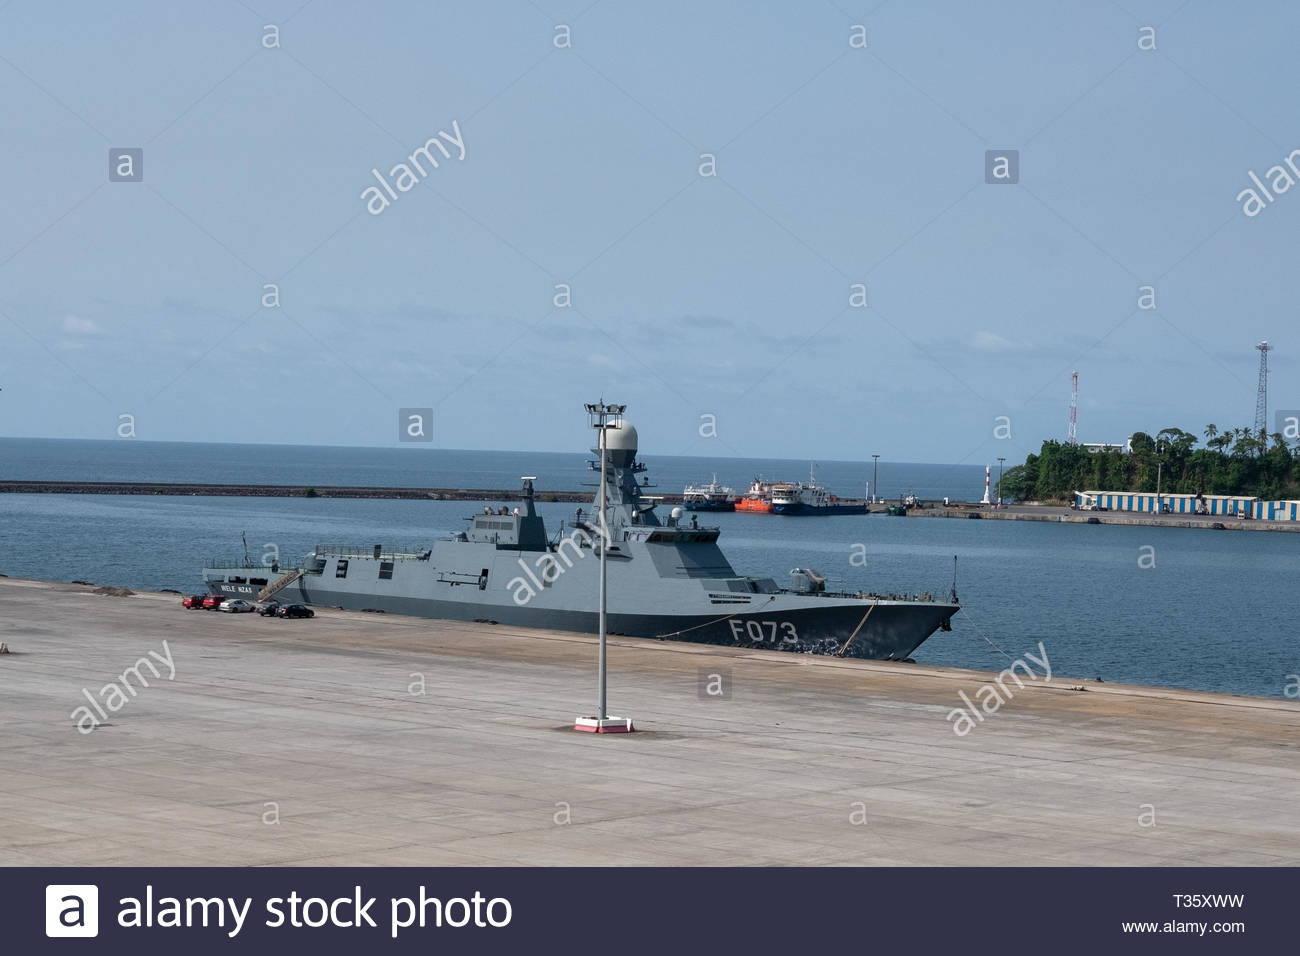 the-flagship-of-the-equatorial-guinea-navy-alongside-a-dock-in-the-harbour-in-malabo-the-capital-T35XWW